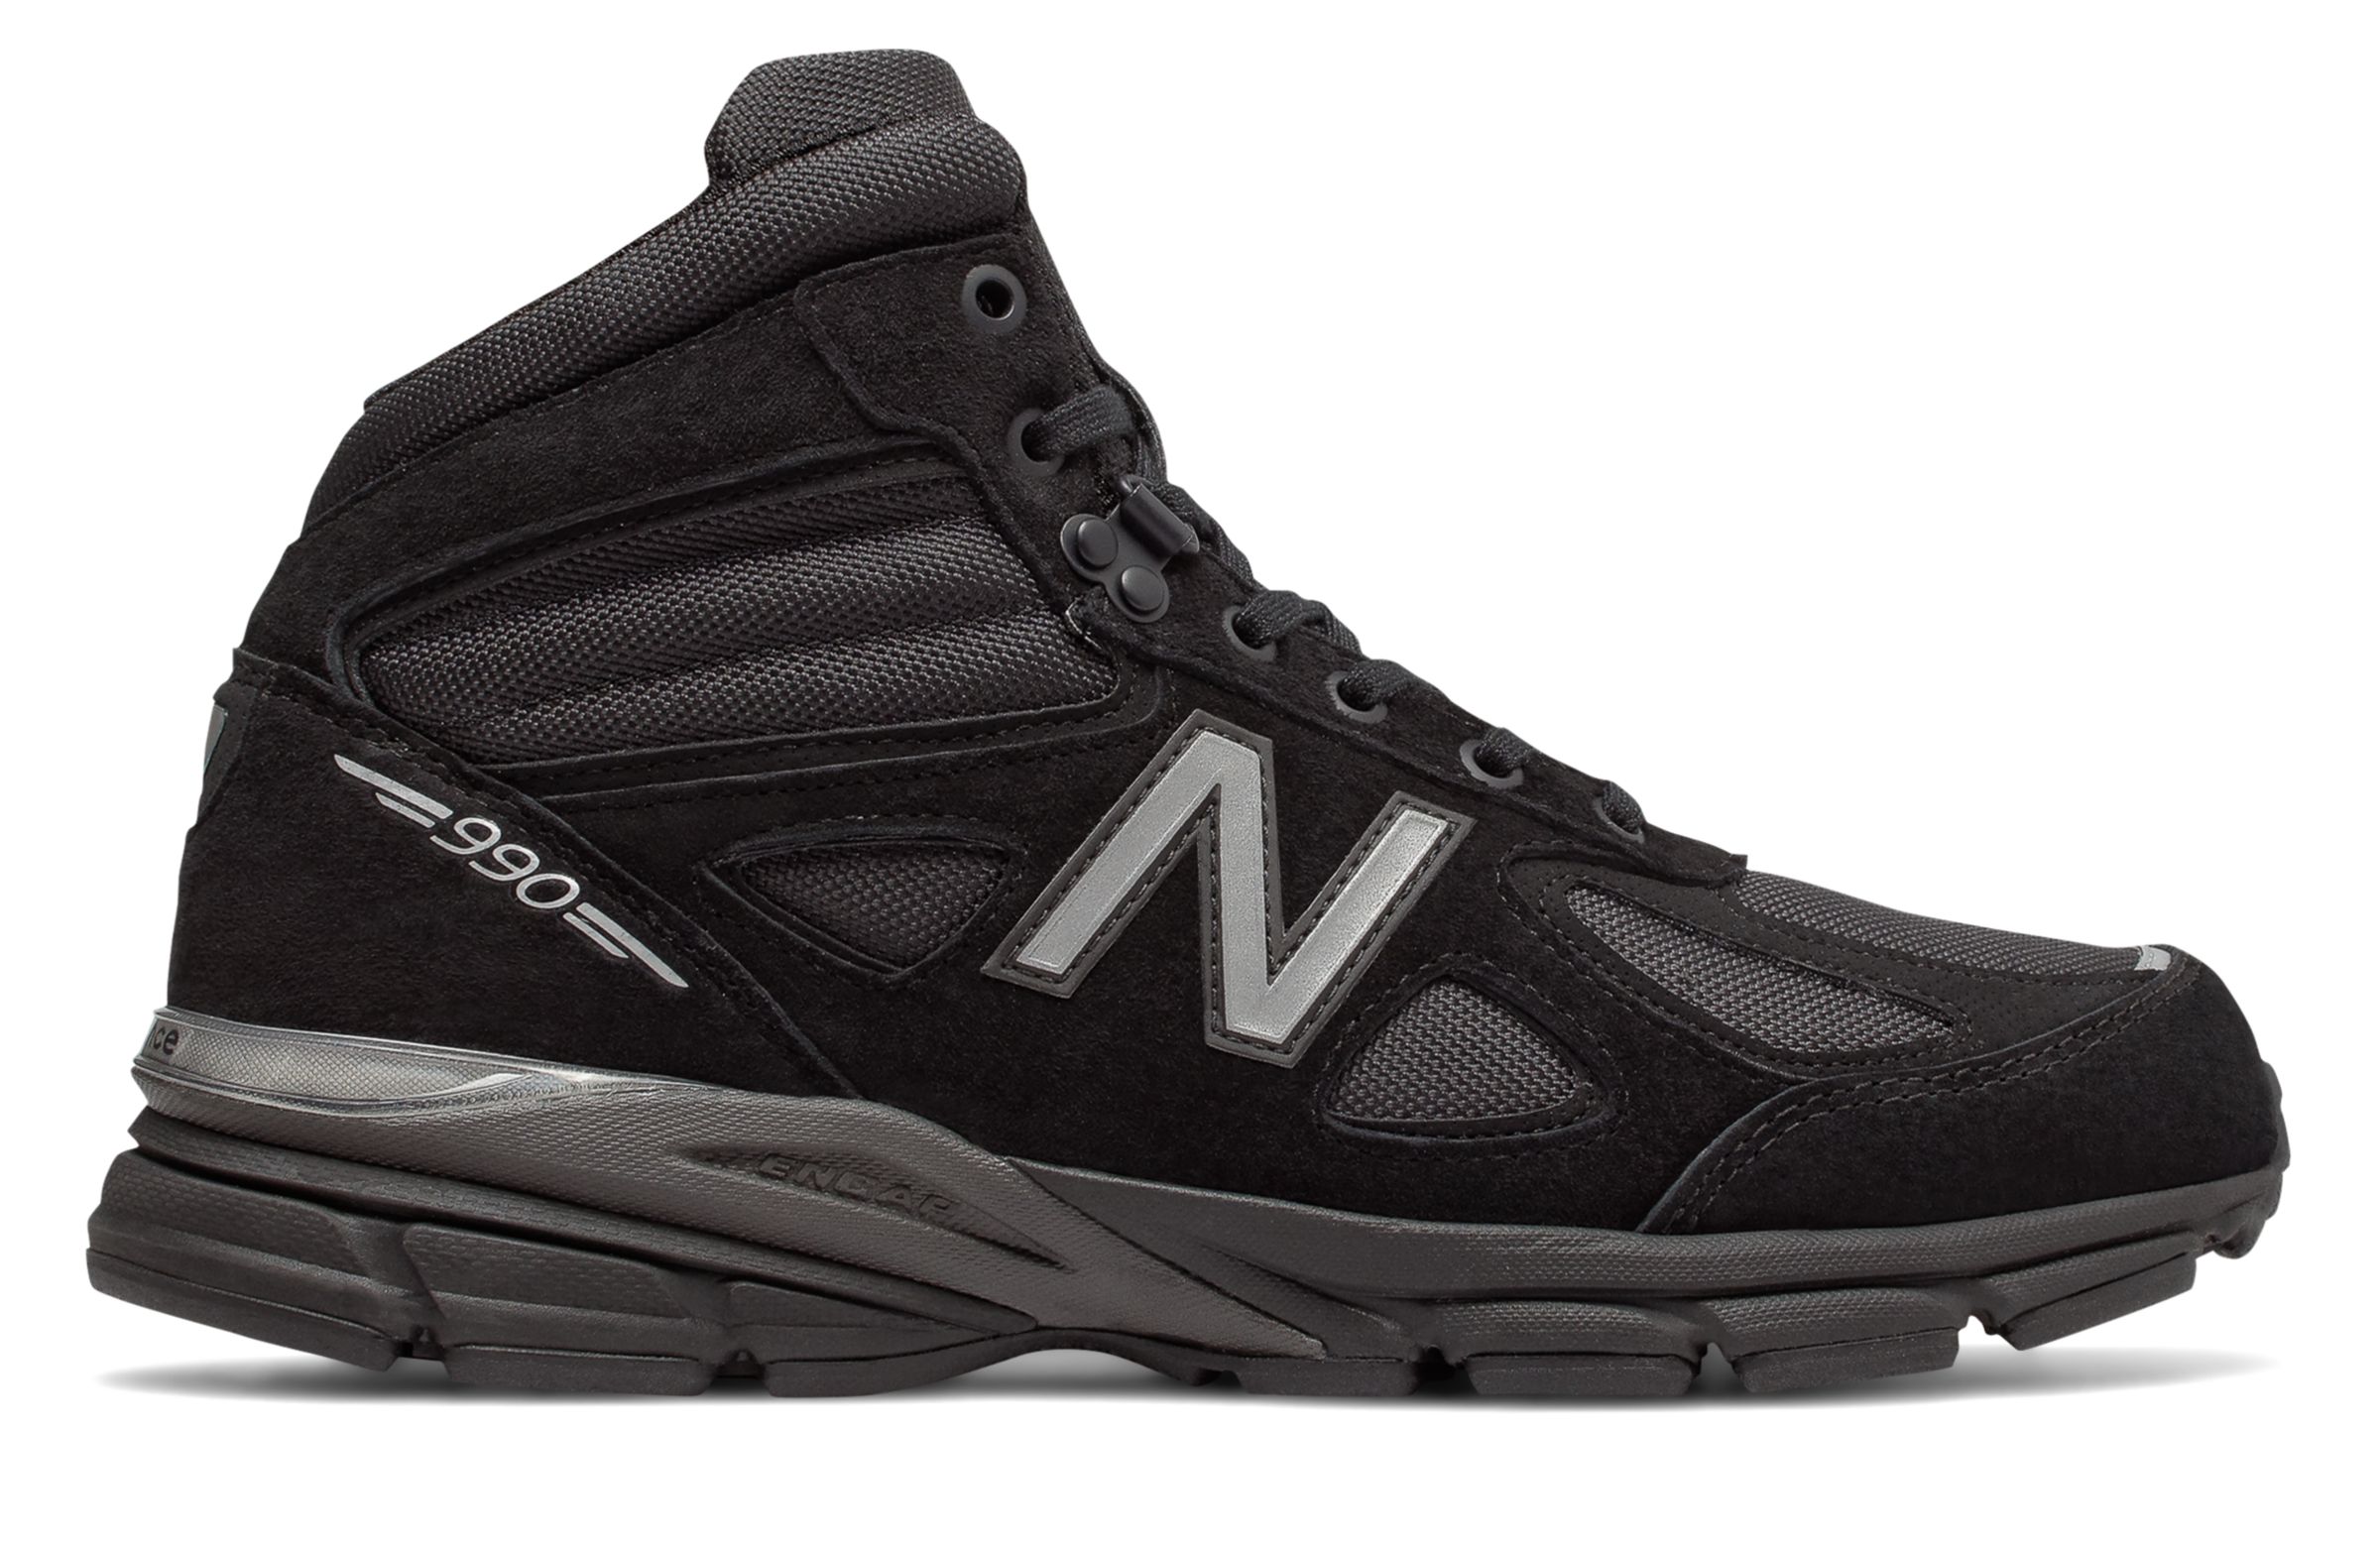 UPC 191264421899 product image for New Balance Men's 990v4 Mid Made in US Shoes Black with Grey | upcitemdb.com